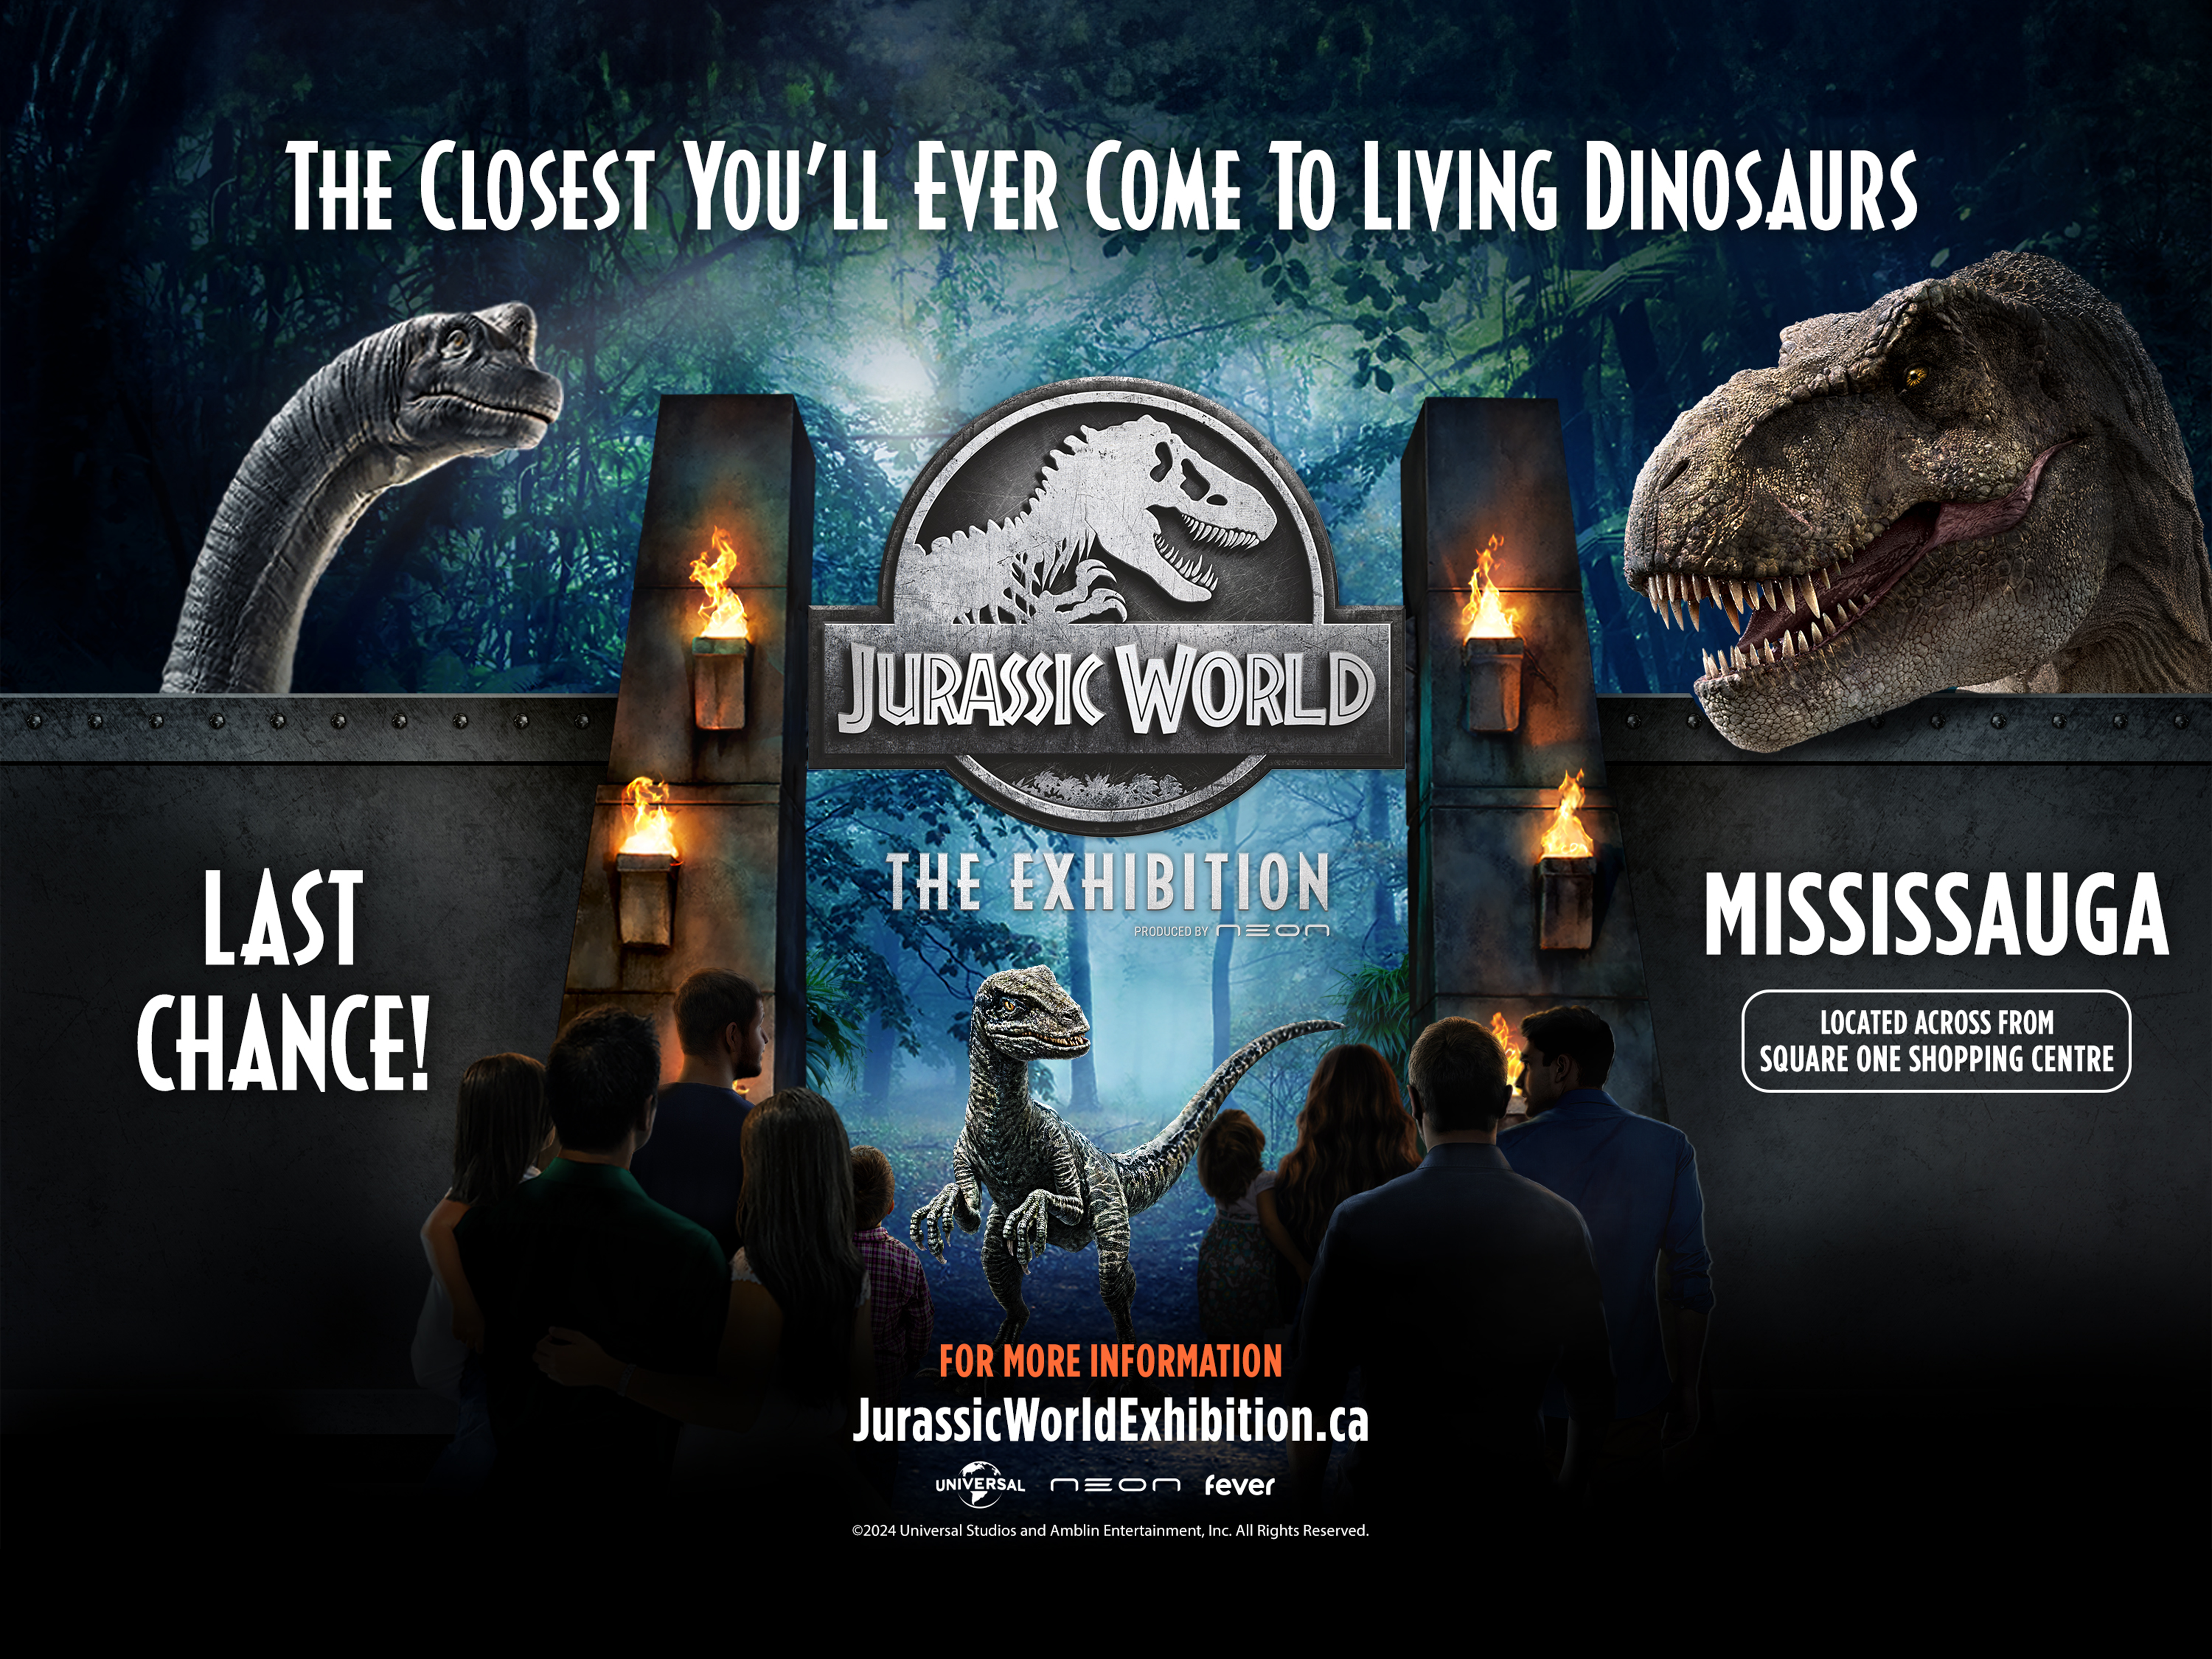 Last Chance For Fans To Travel To Isla Nublar And Experience Jurassic World Dinosaurs A Square One Mississauga